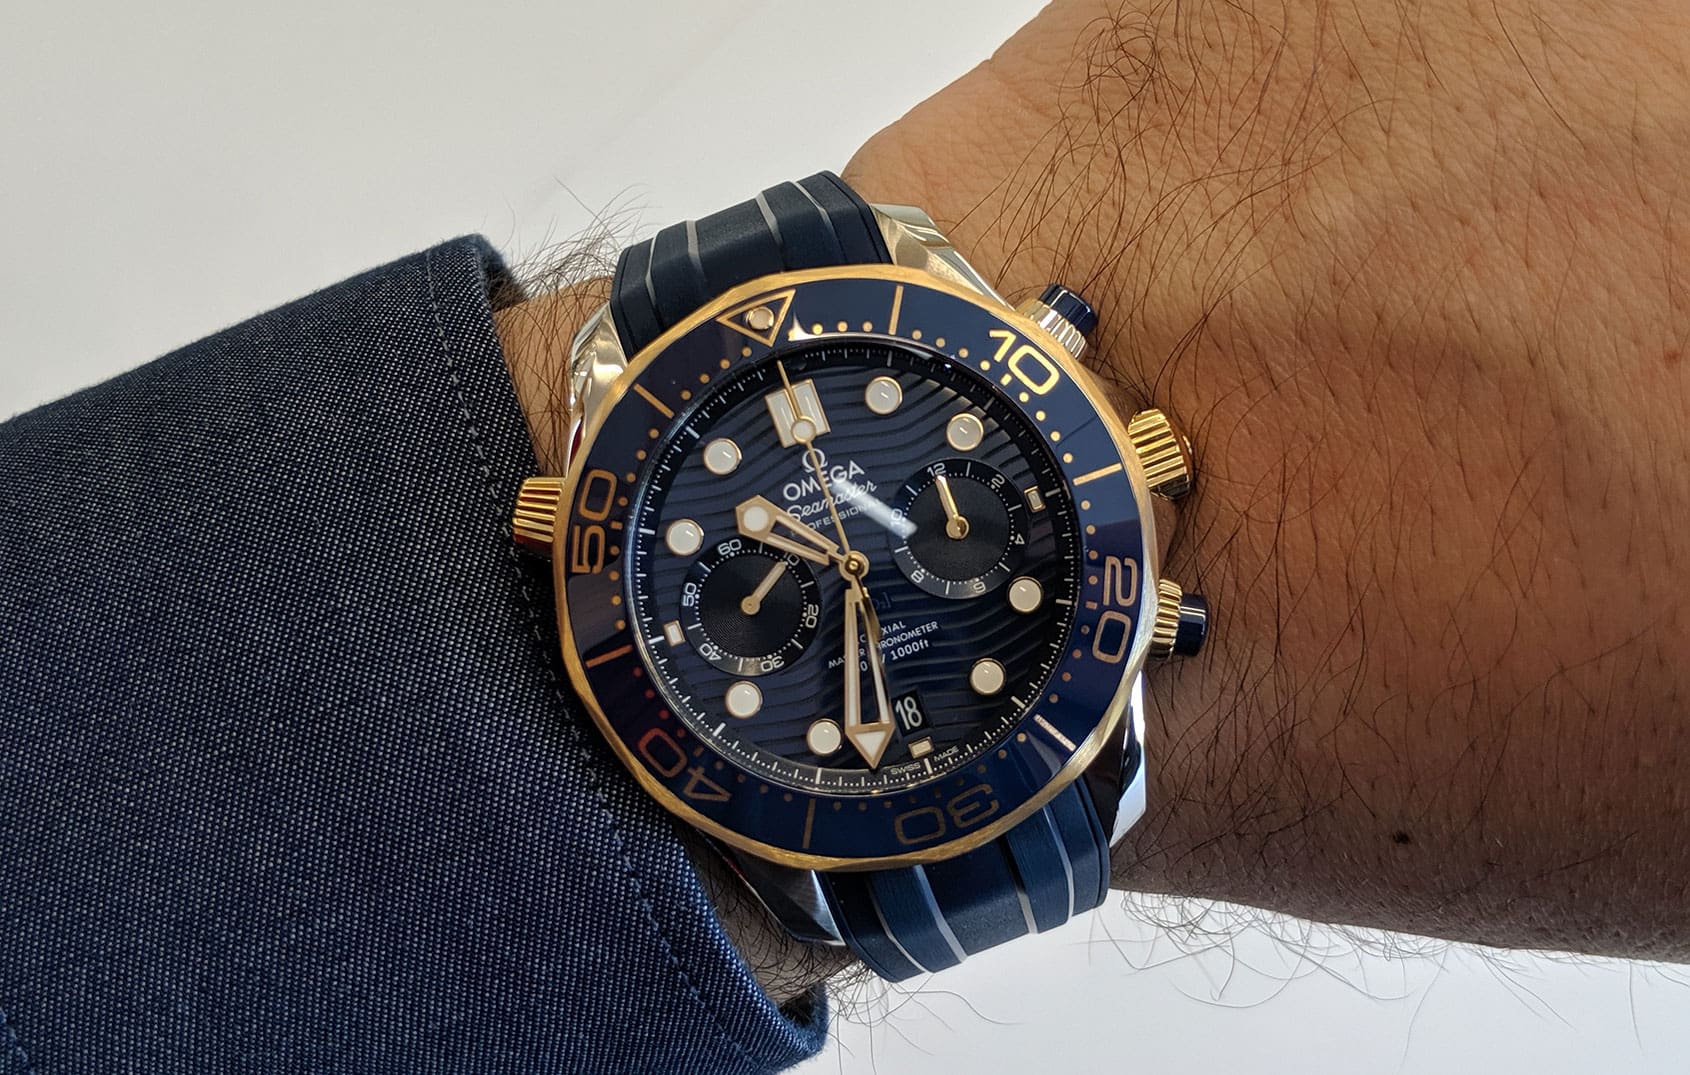 Omega 75th Anniversary Seamaster Diver 300m Review